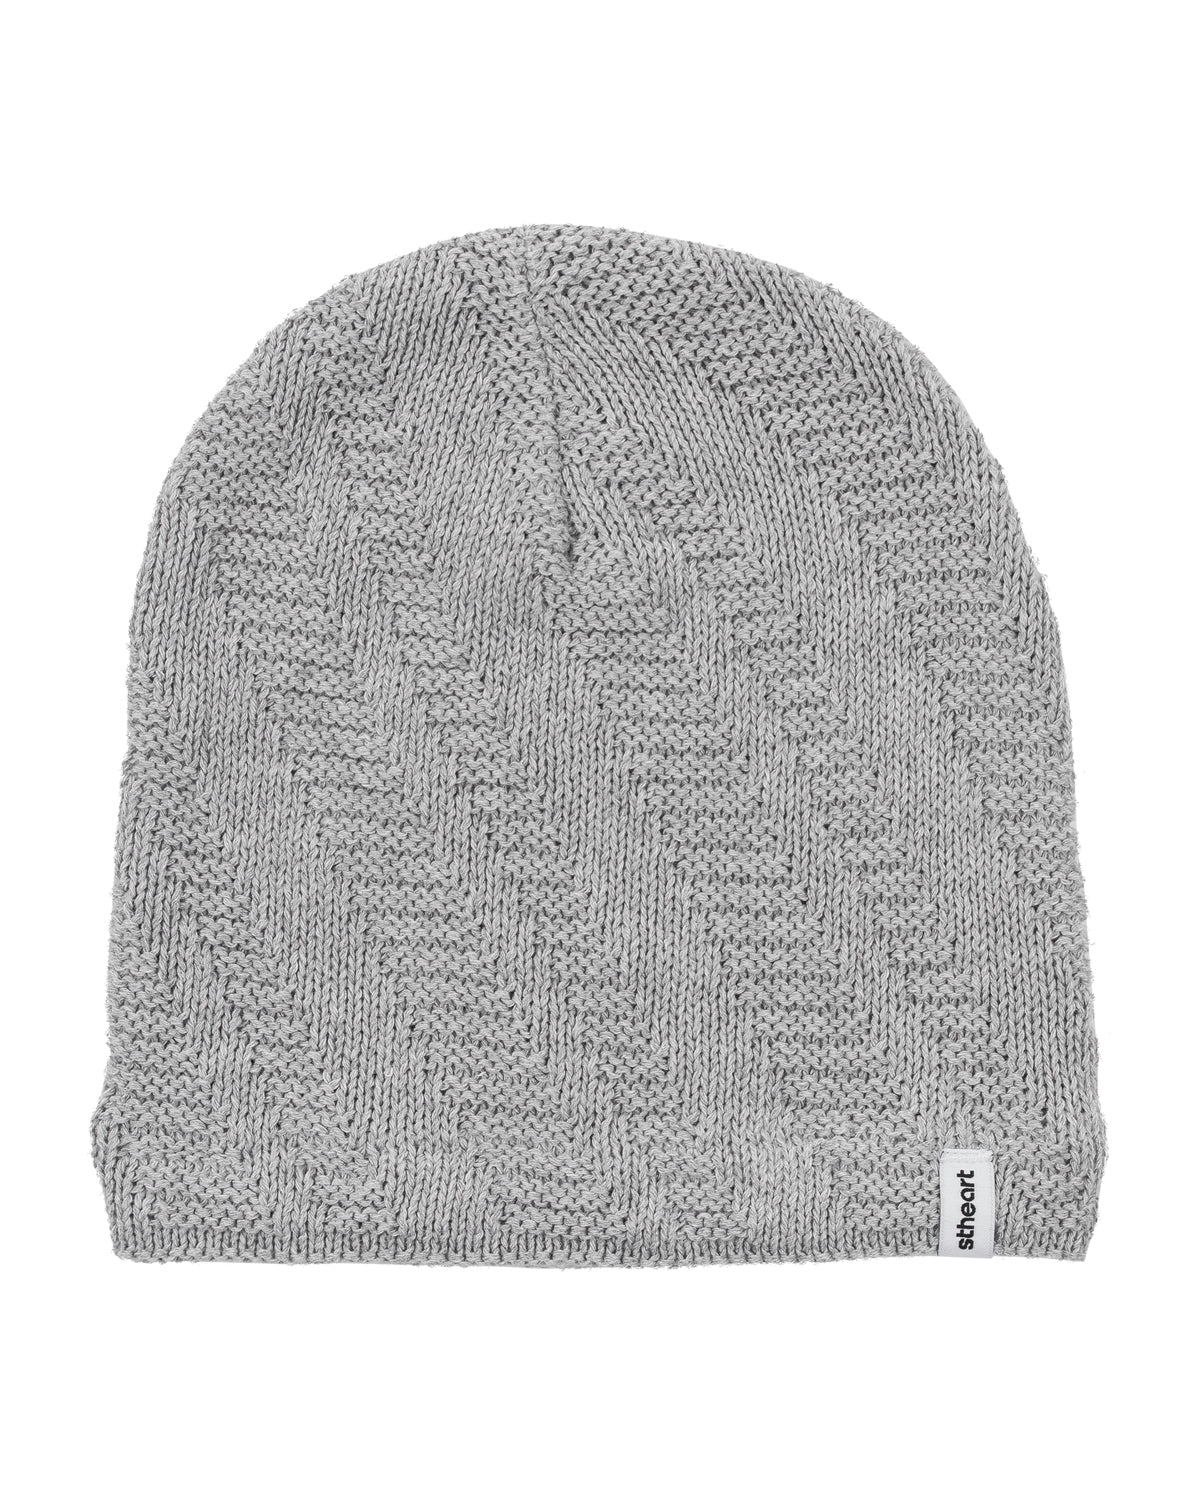 Staircase Slouch Beanie | Sport Grey